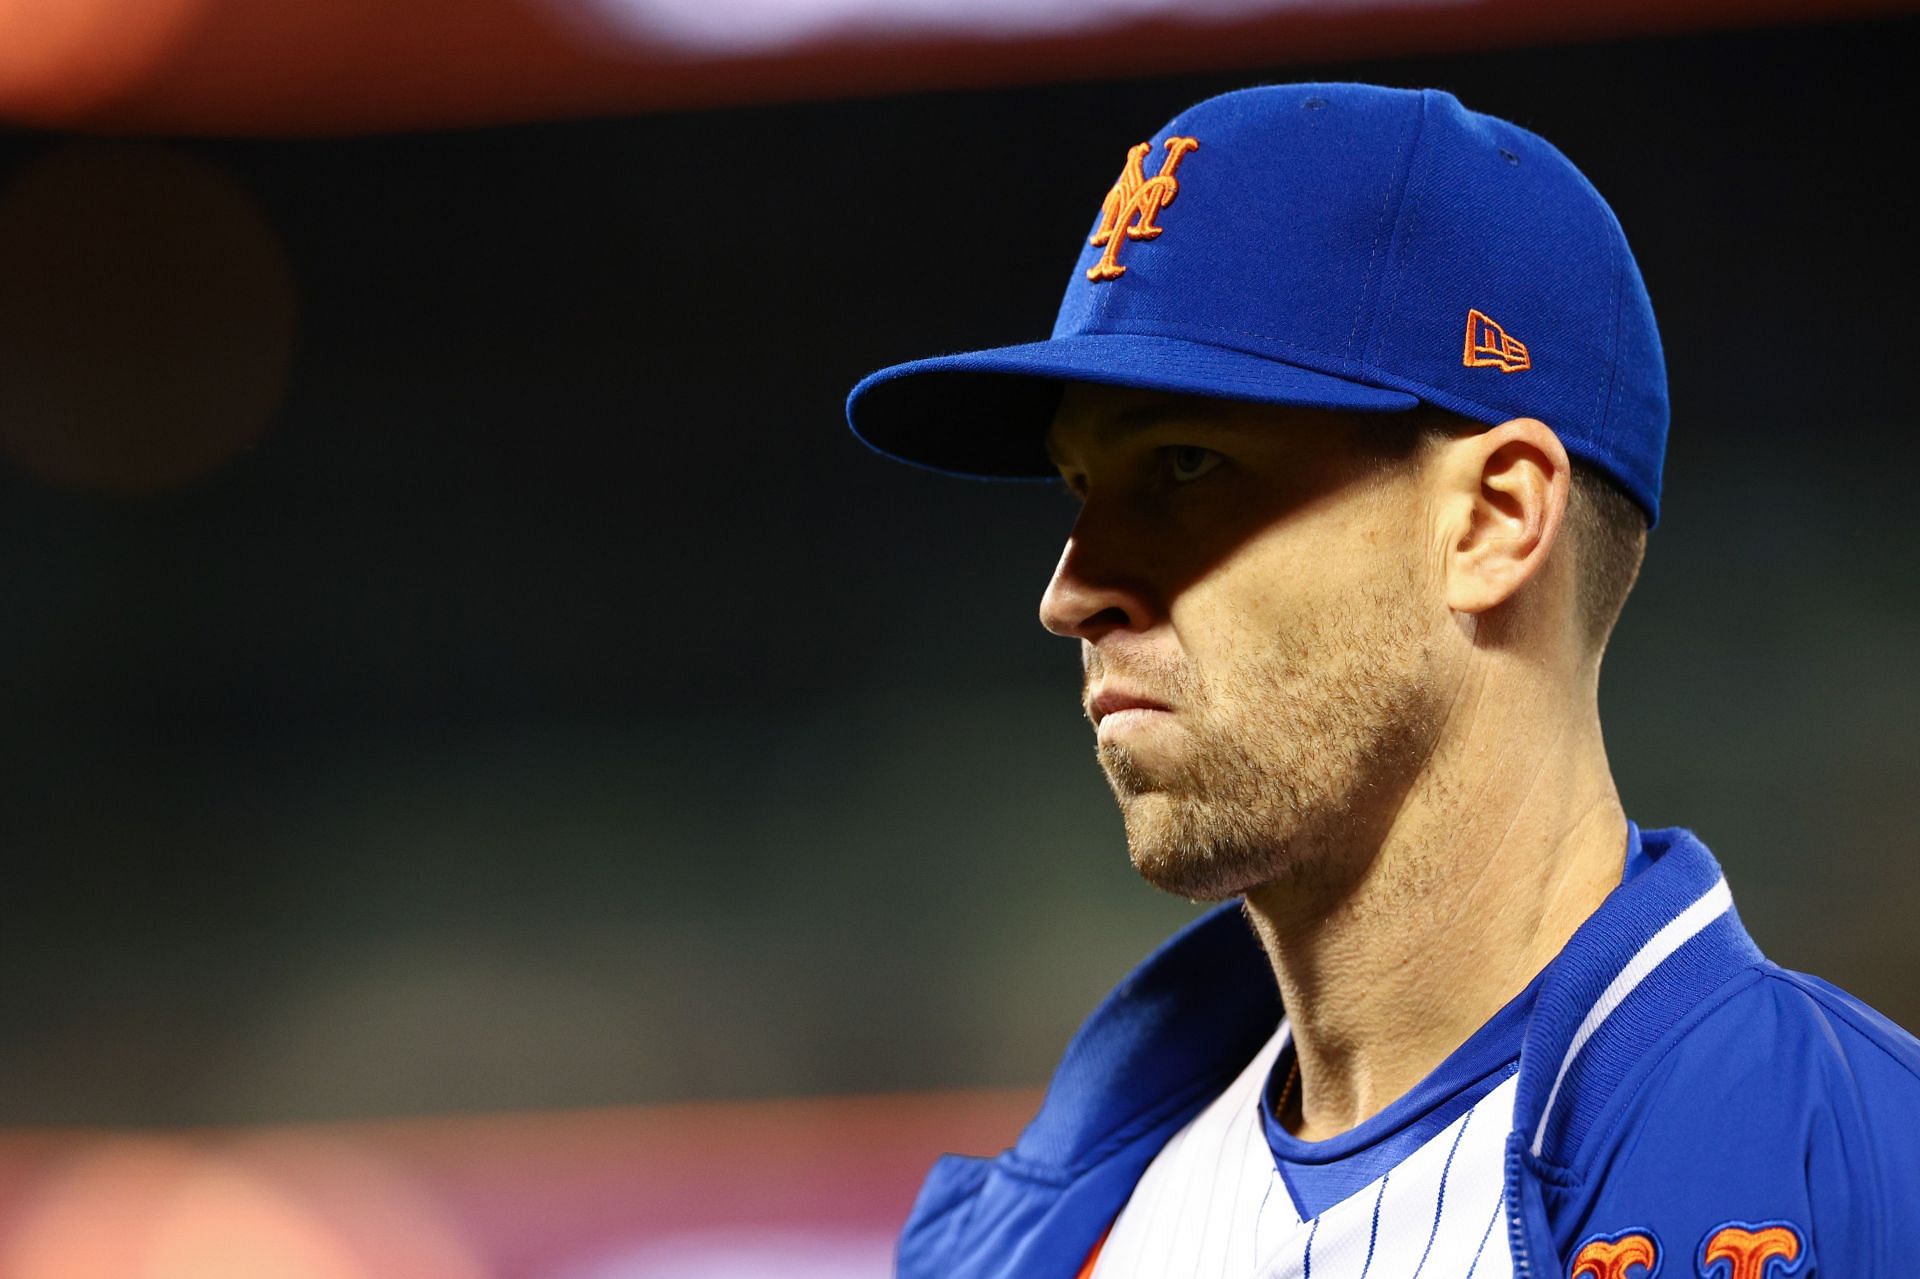 Rangers ace Jacob deGrom needs elbow surgery, will miss rest of